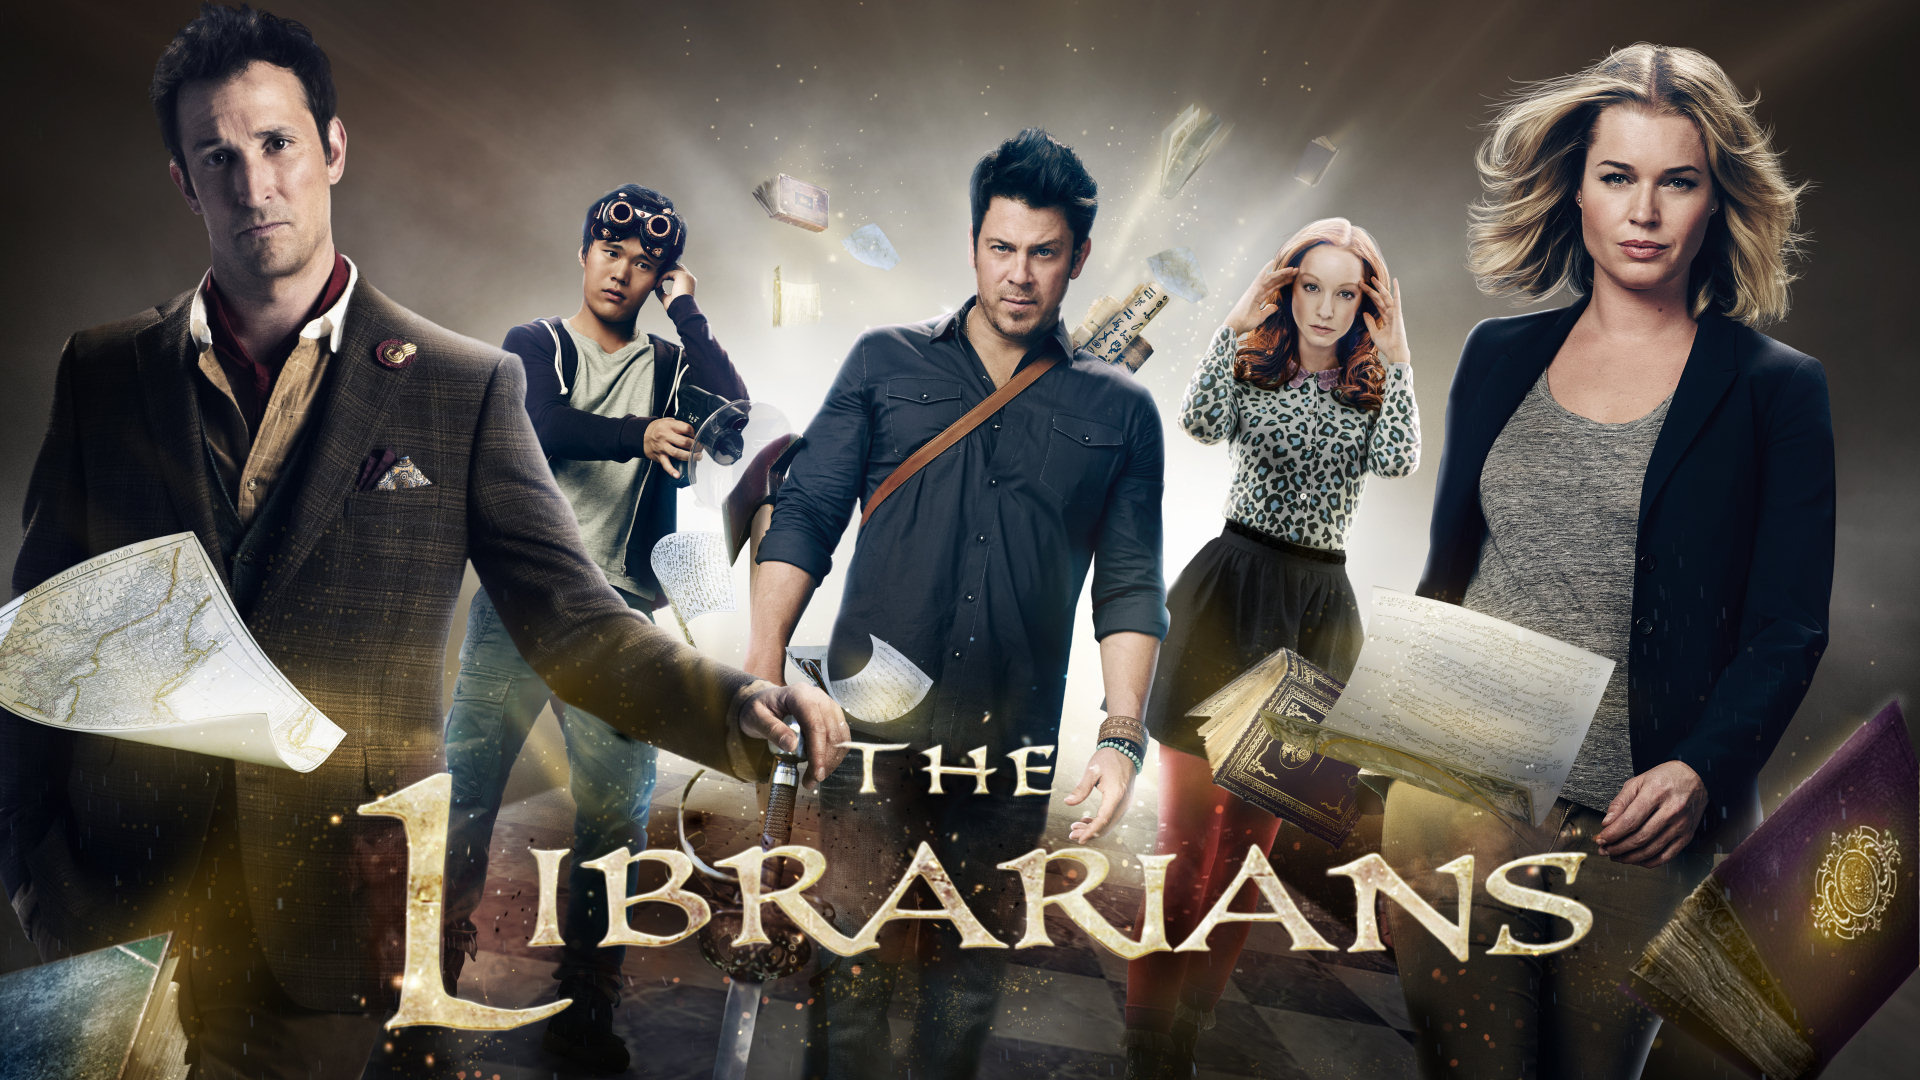 Show The Librarians